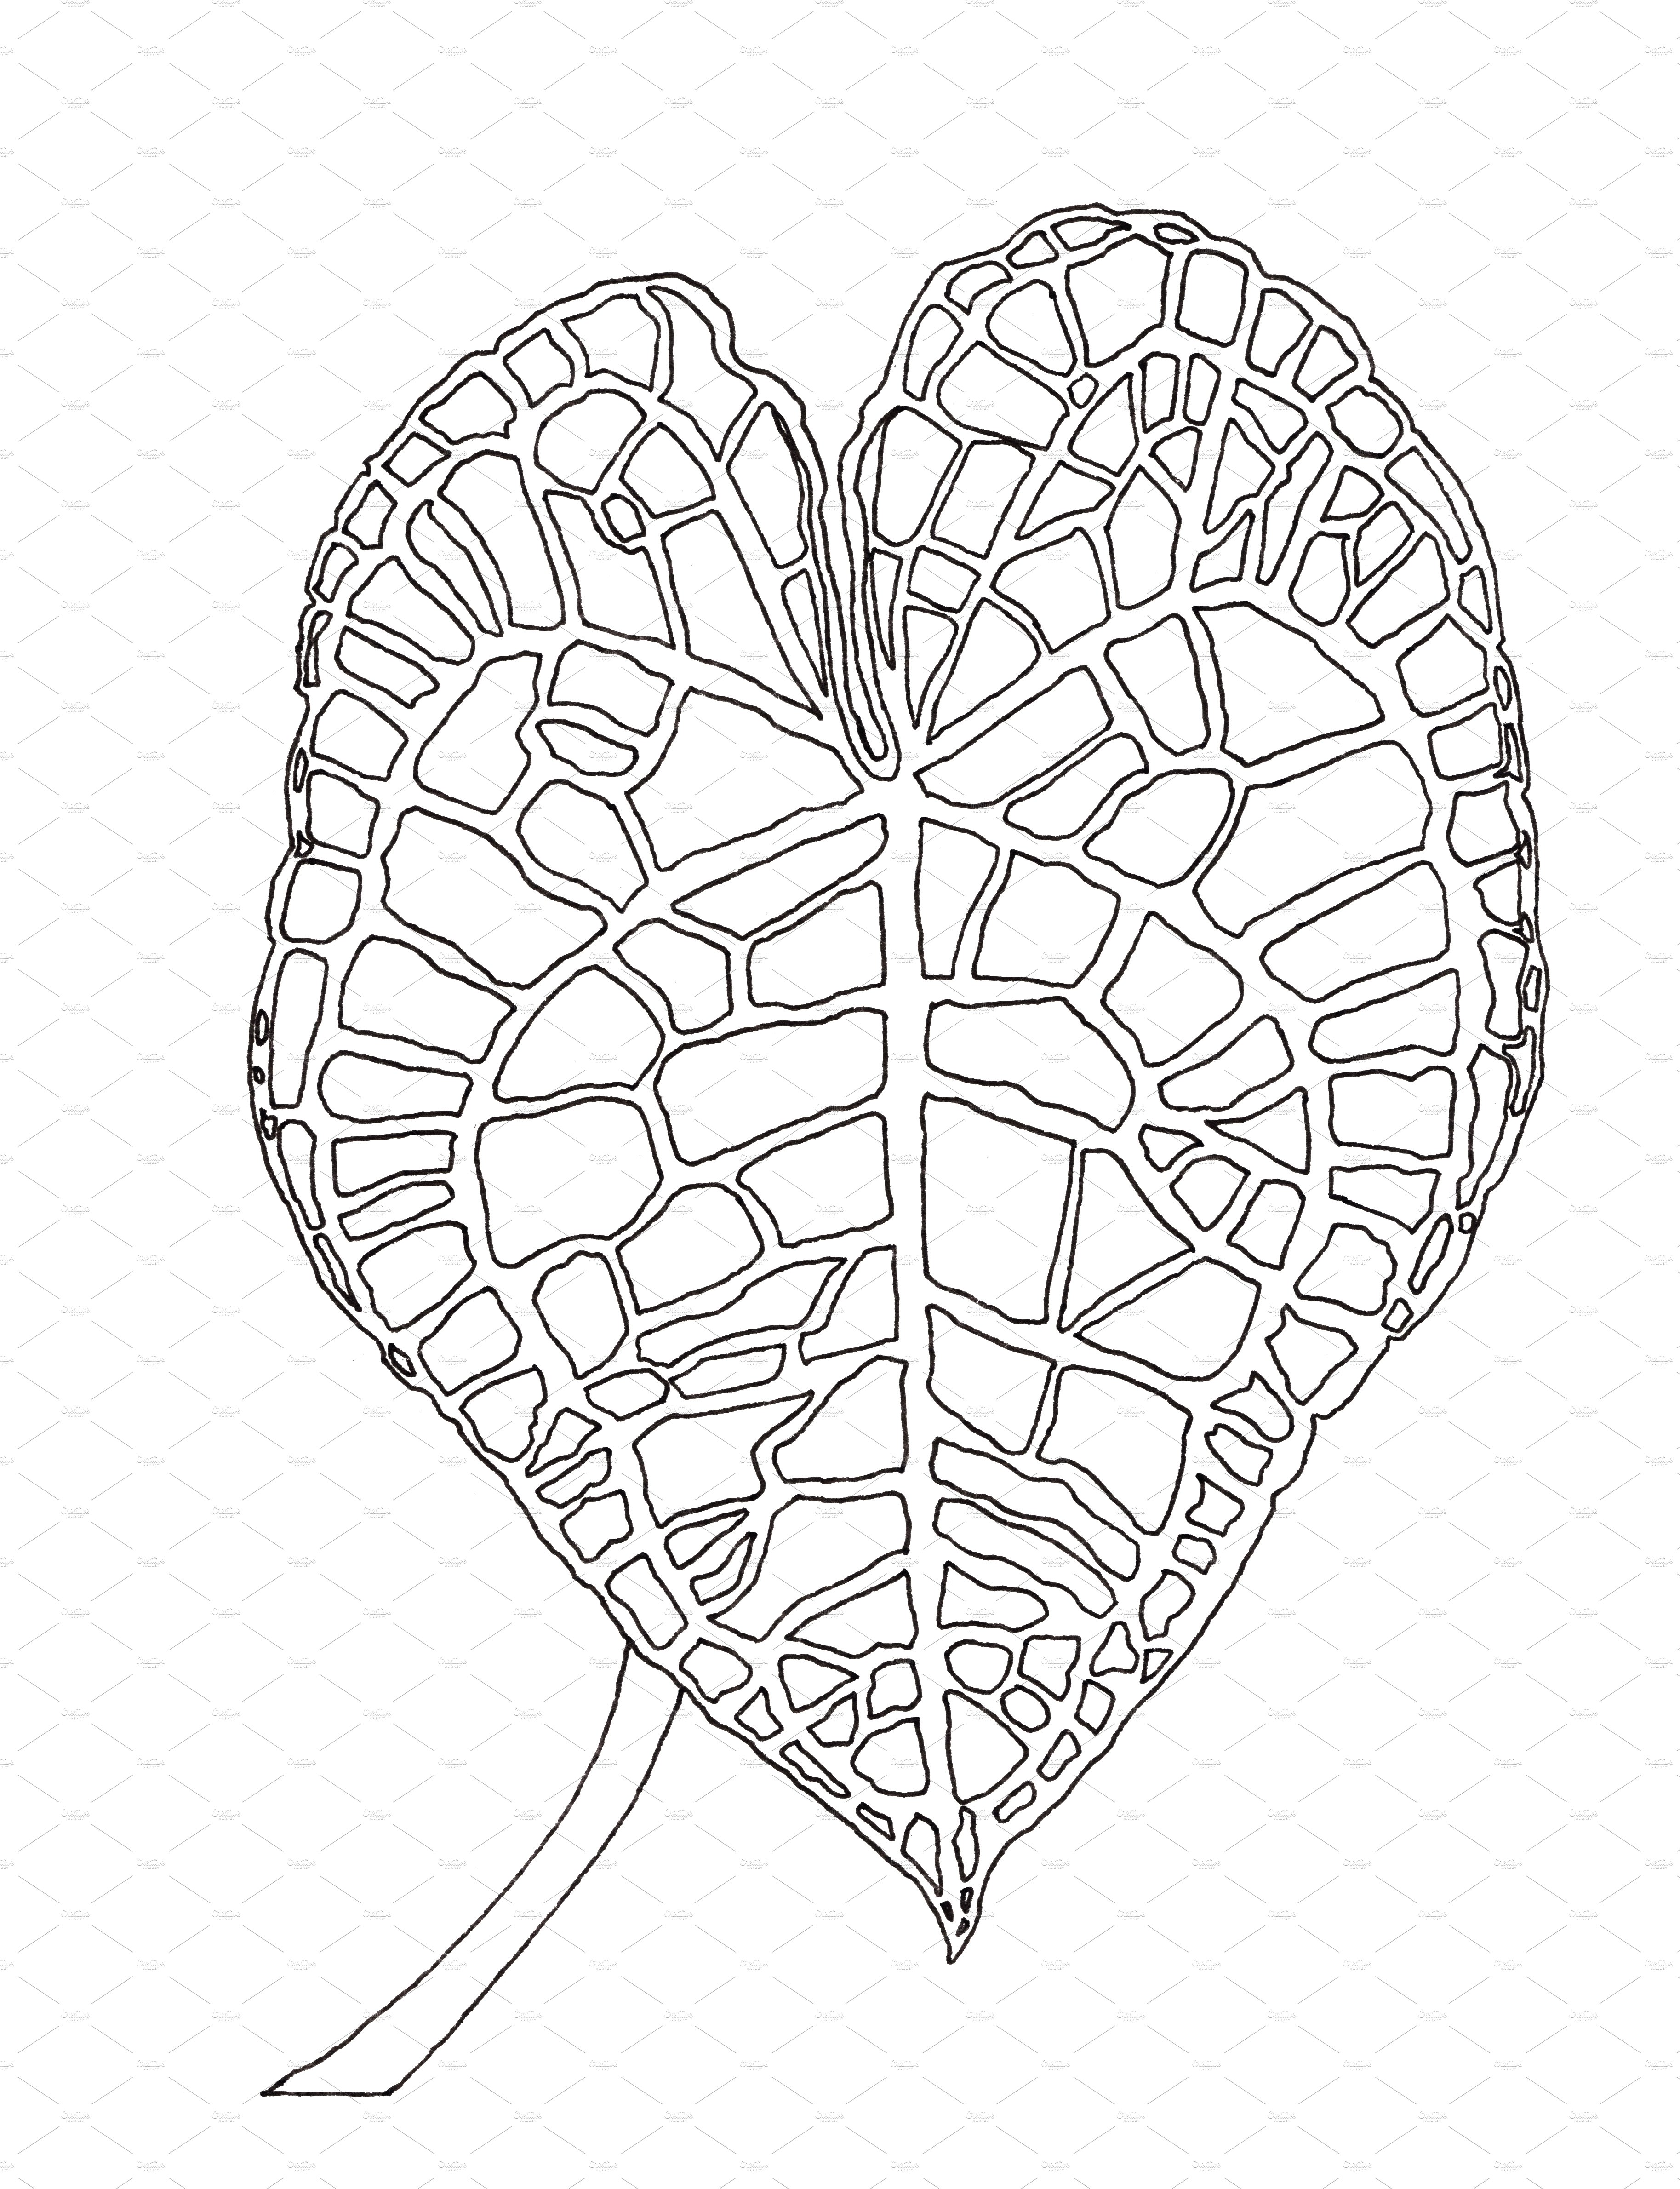 Black and white drawing of a heart shaped plant.